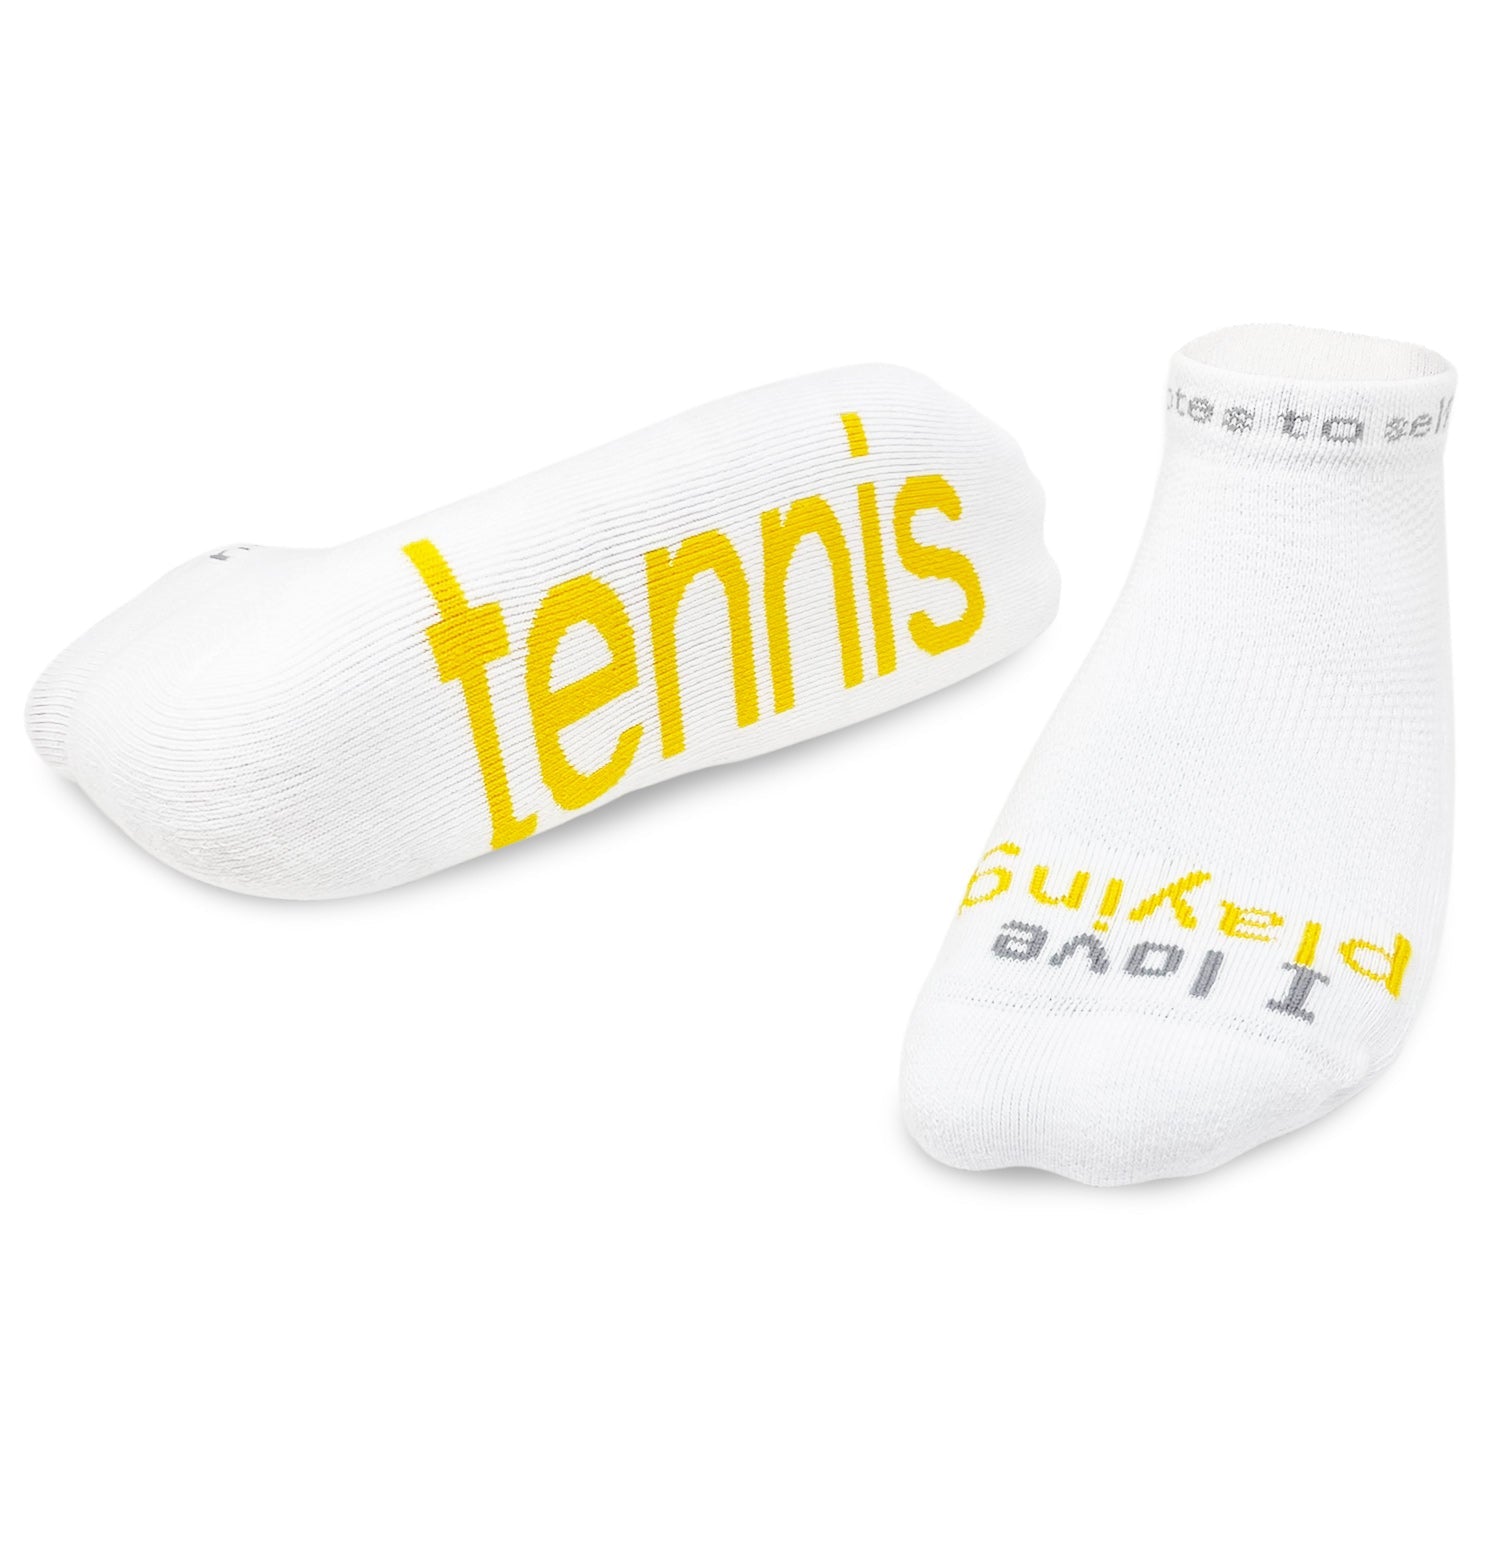 Tennis athletic Socks  *Notes to self